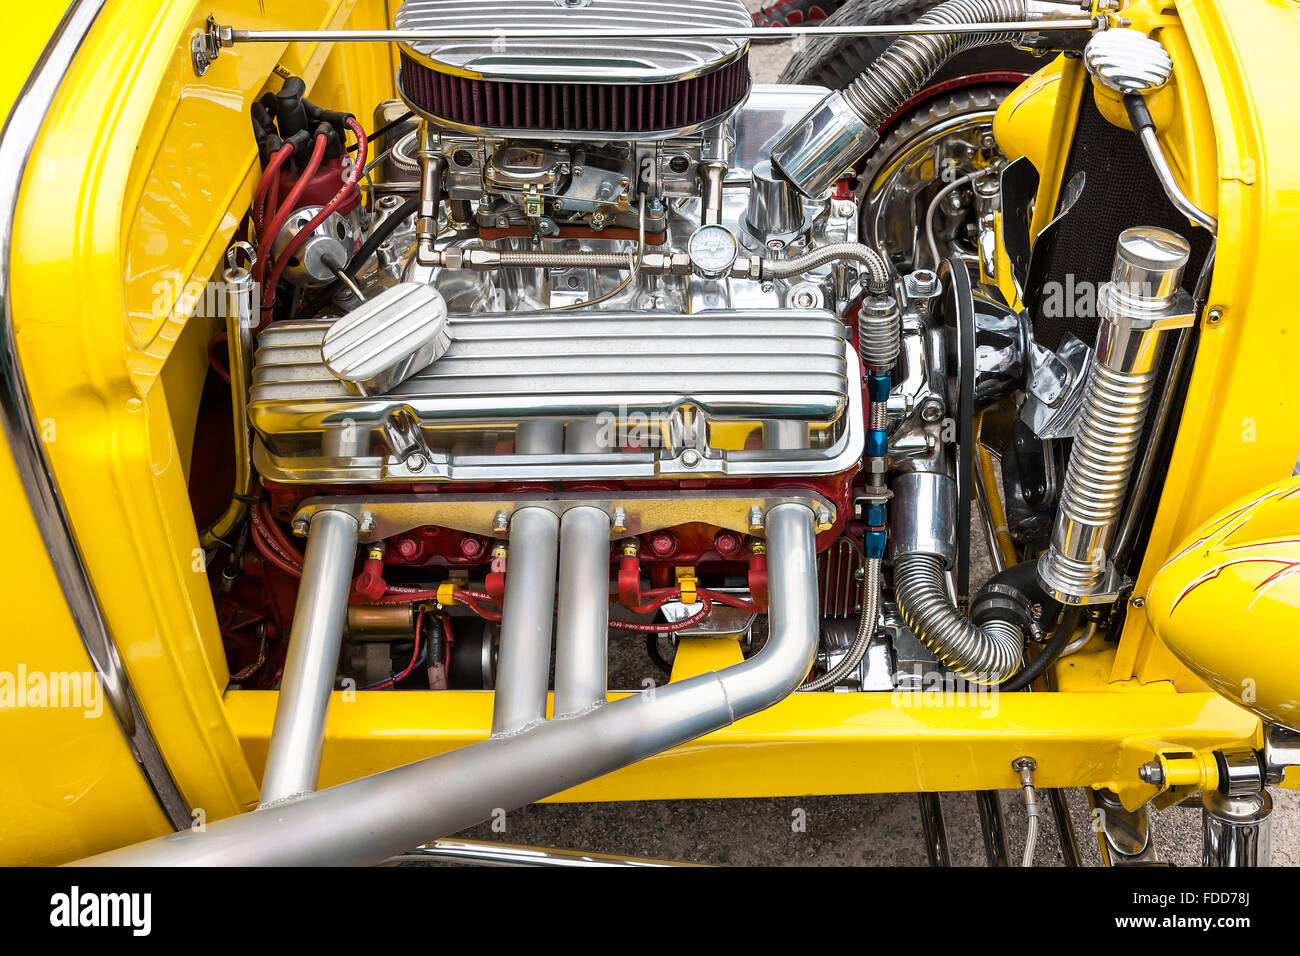 Close-up of Car's Engine, American Classic Car Stock Photo